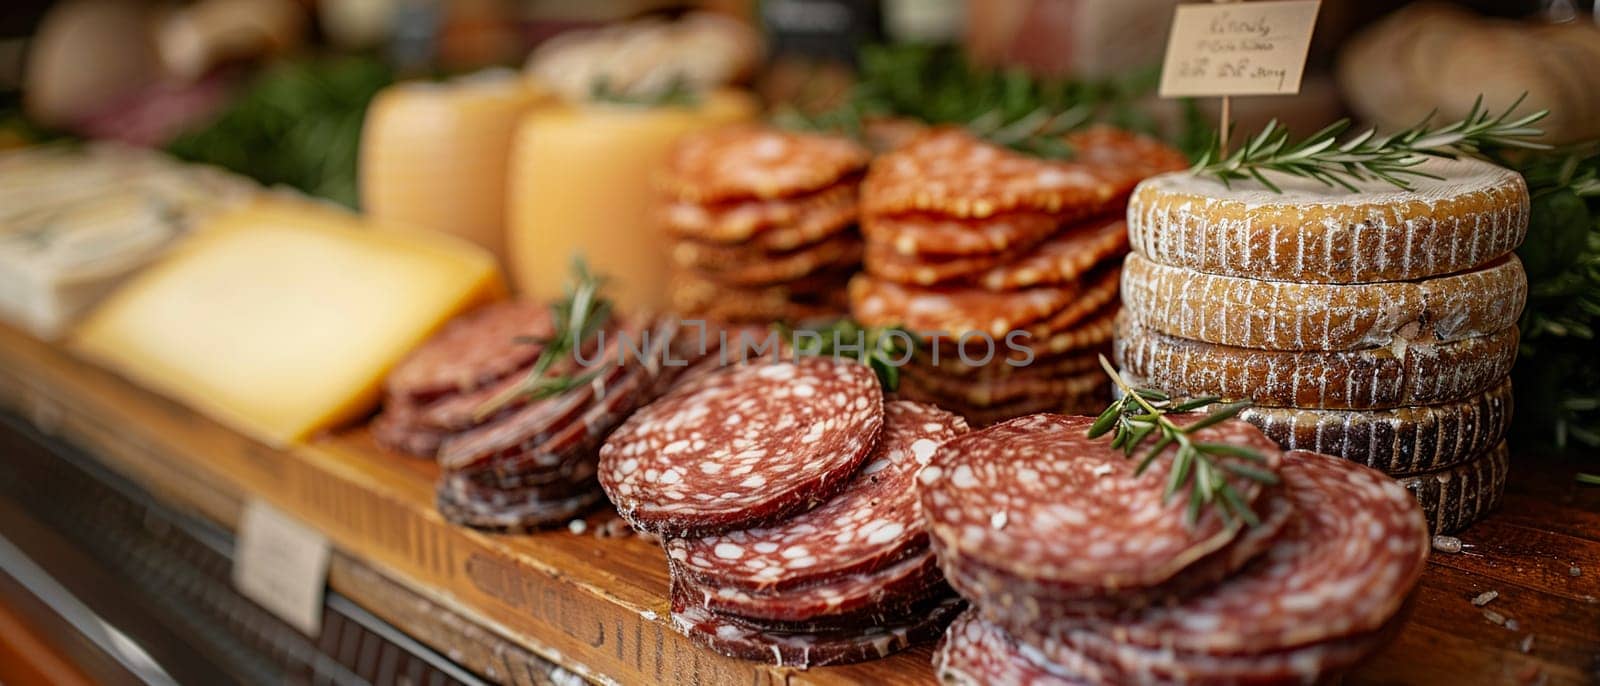 European Delicatessen Serves Tradition in Business of Imported Gourmet Specialties, Cheese wheels and cured meats serve tradition and imported gourmet specialties in the European delicatessen business.